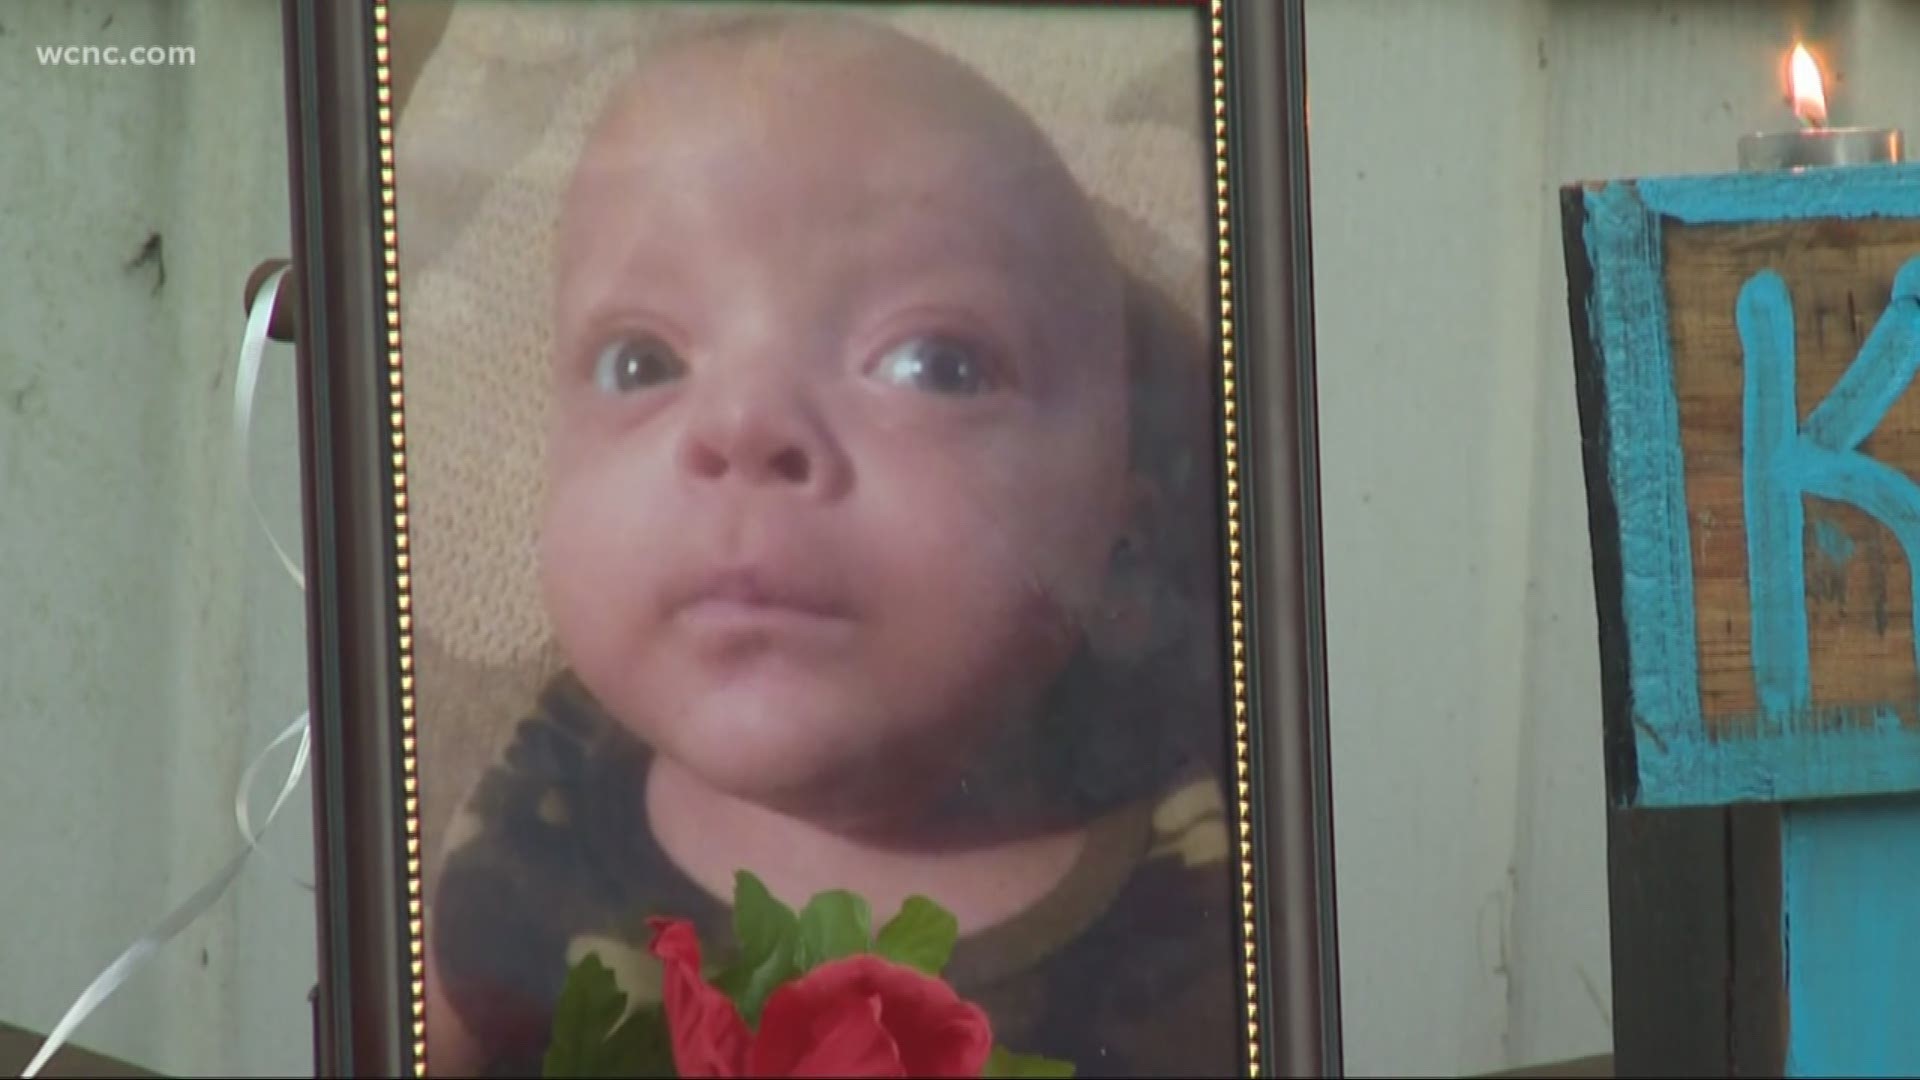 Family and friends gathered to honor the life of infant Kade Gill. He died after a tree fell on his family's mobile home in the aftermath of Florence.